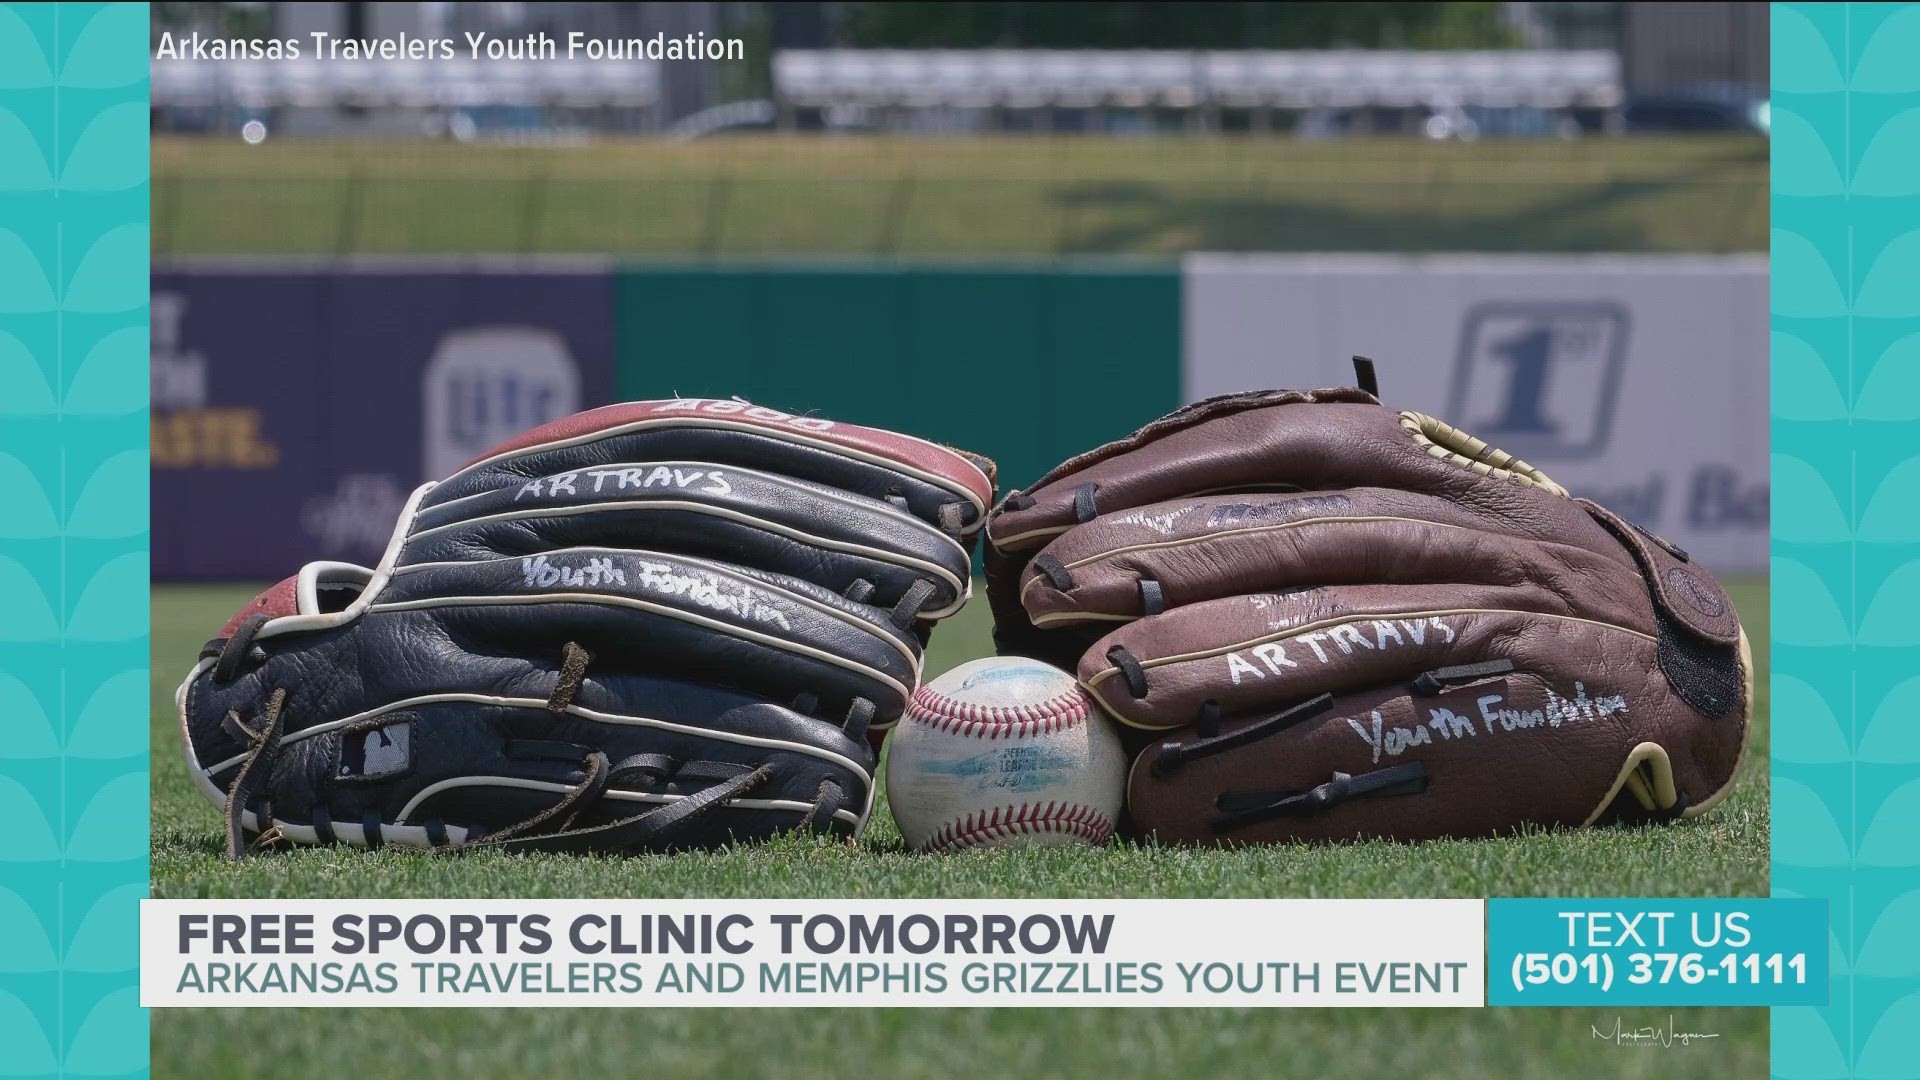 Lance Restrum with the Arkansas Travelers Youth Foundation shares how kids can participate at their free sports clinics.